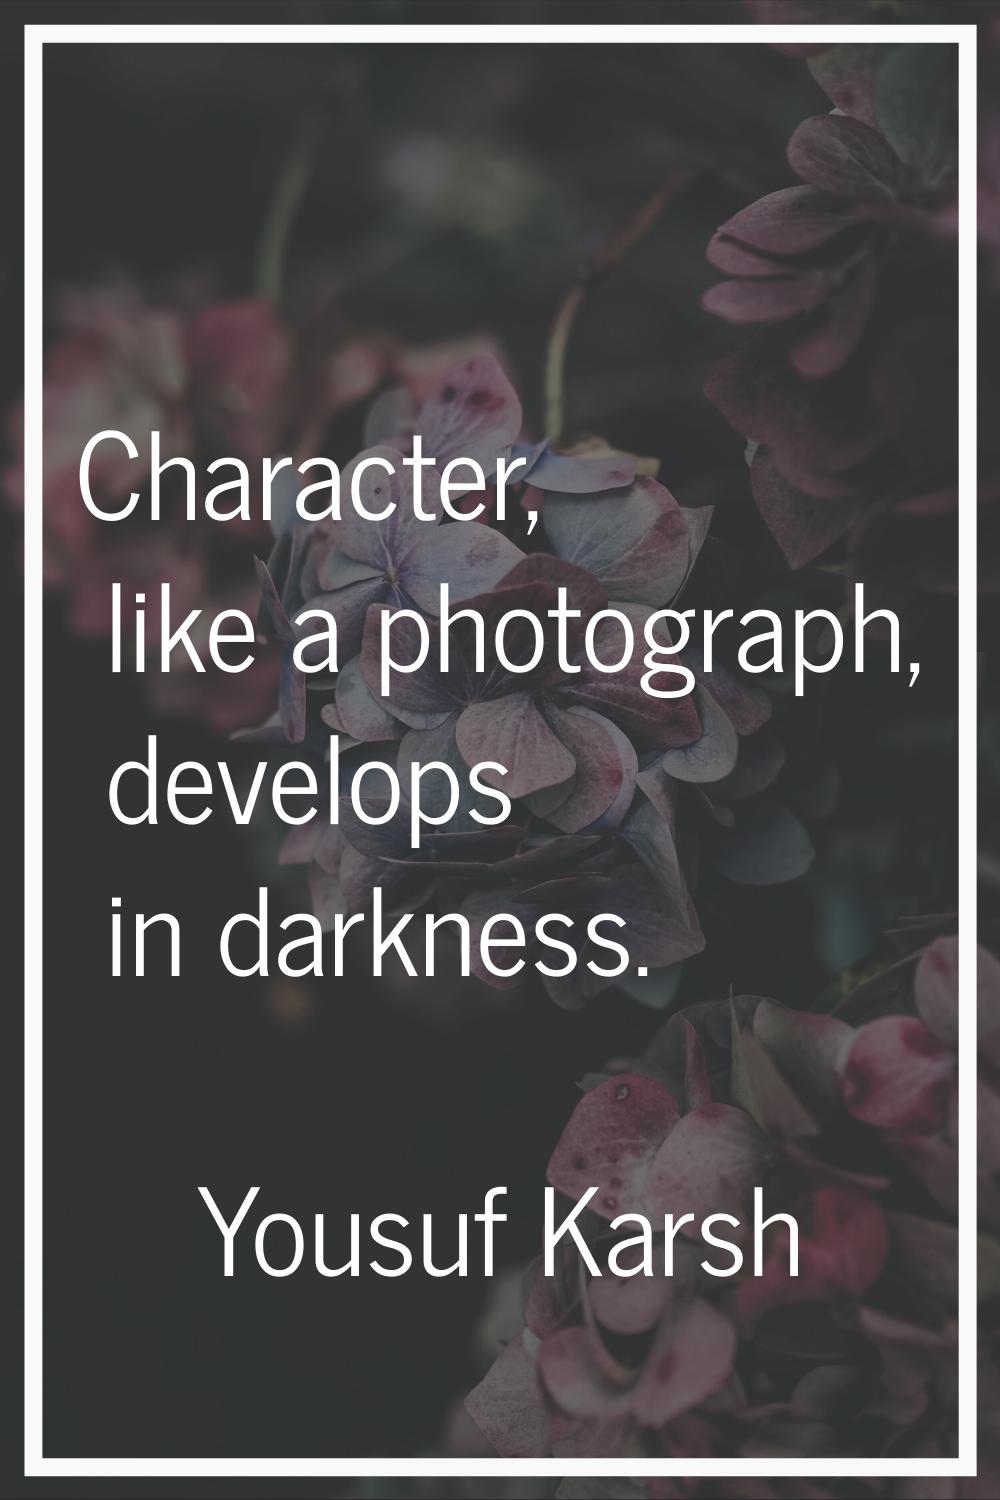 Character, like a photograph, develops in darkness.